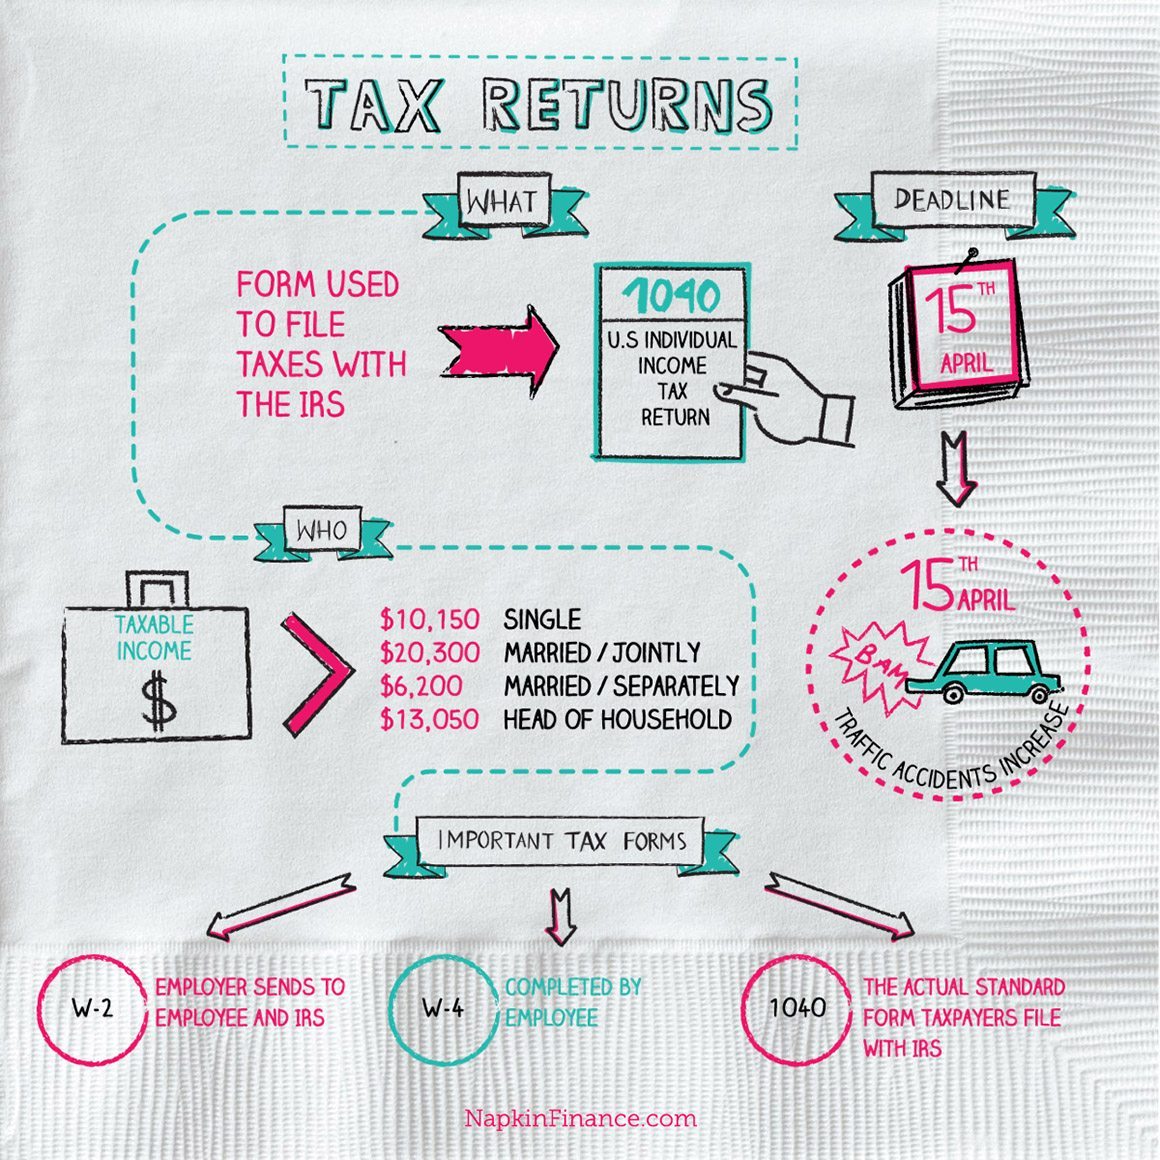 How can you obtain federal tax forms?